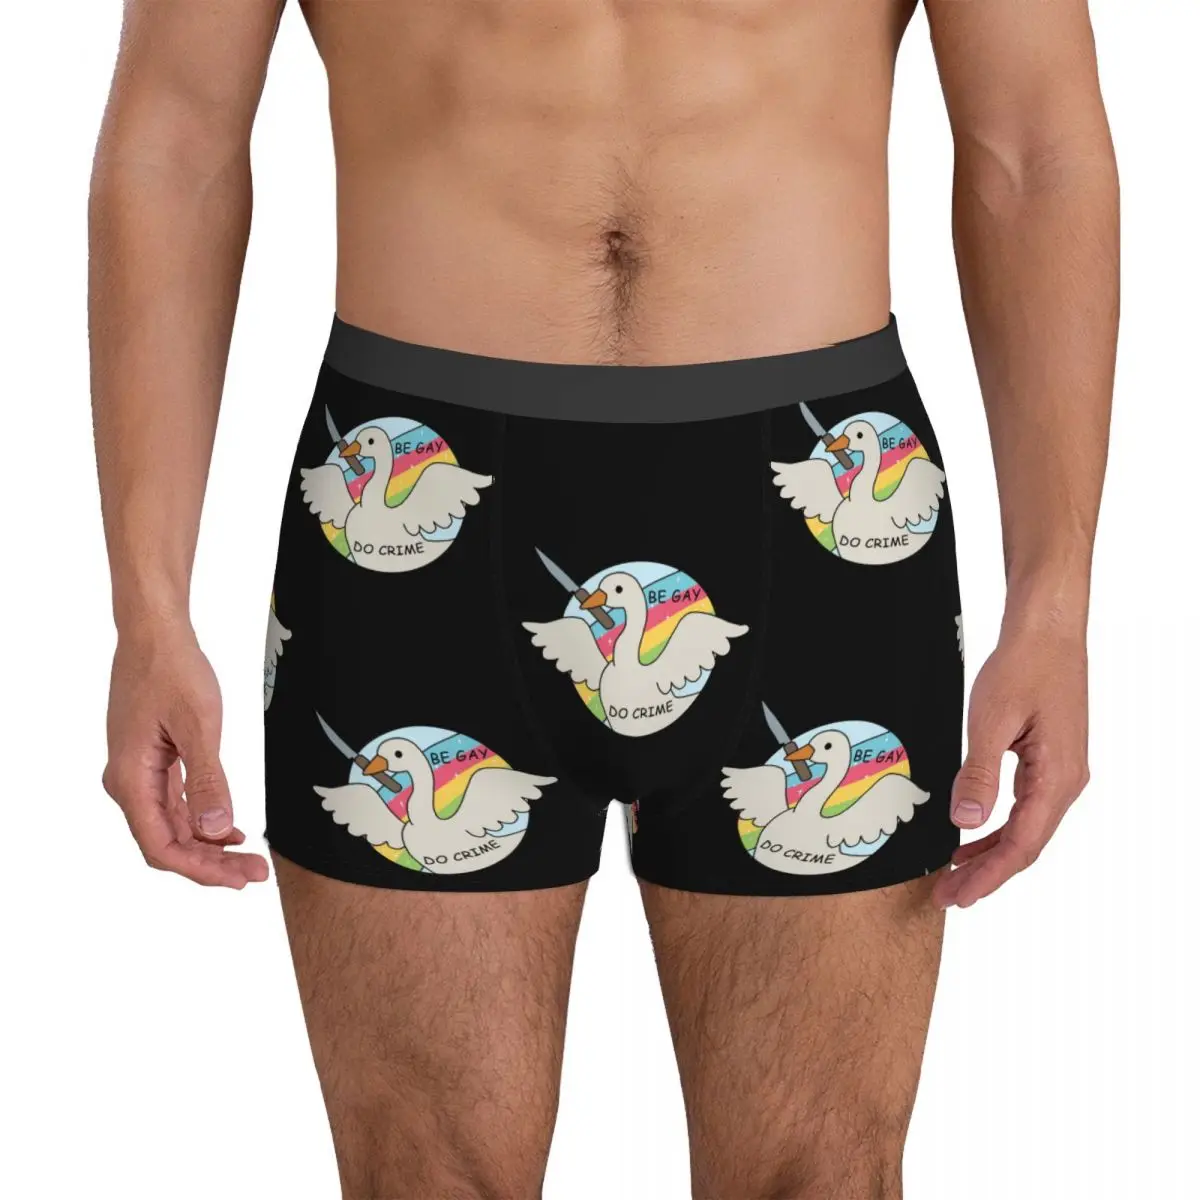 Be Gay Do Crime Goose Underwear proud gay knife rainbow Man Boxer Brief Breathable Trunk High Quality Plus Size Underpants